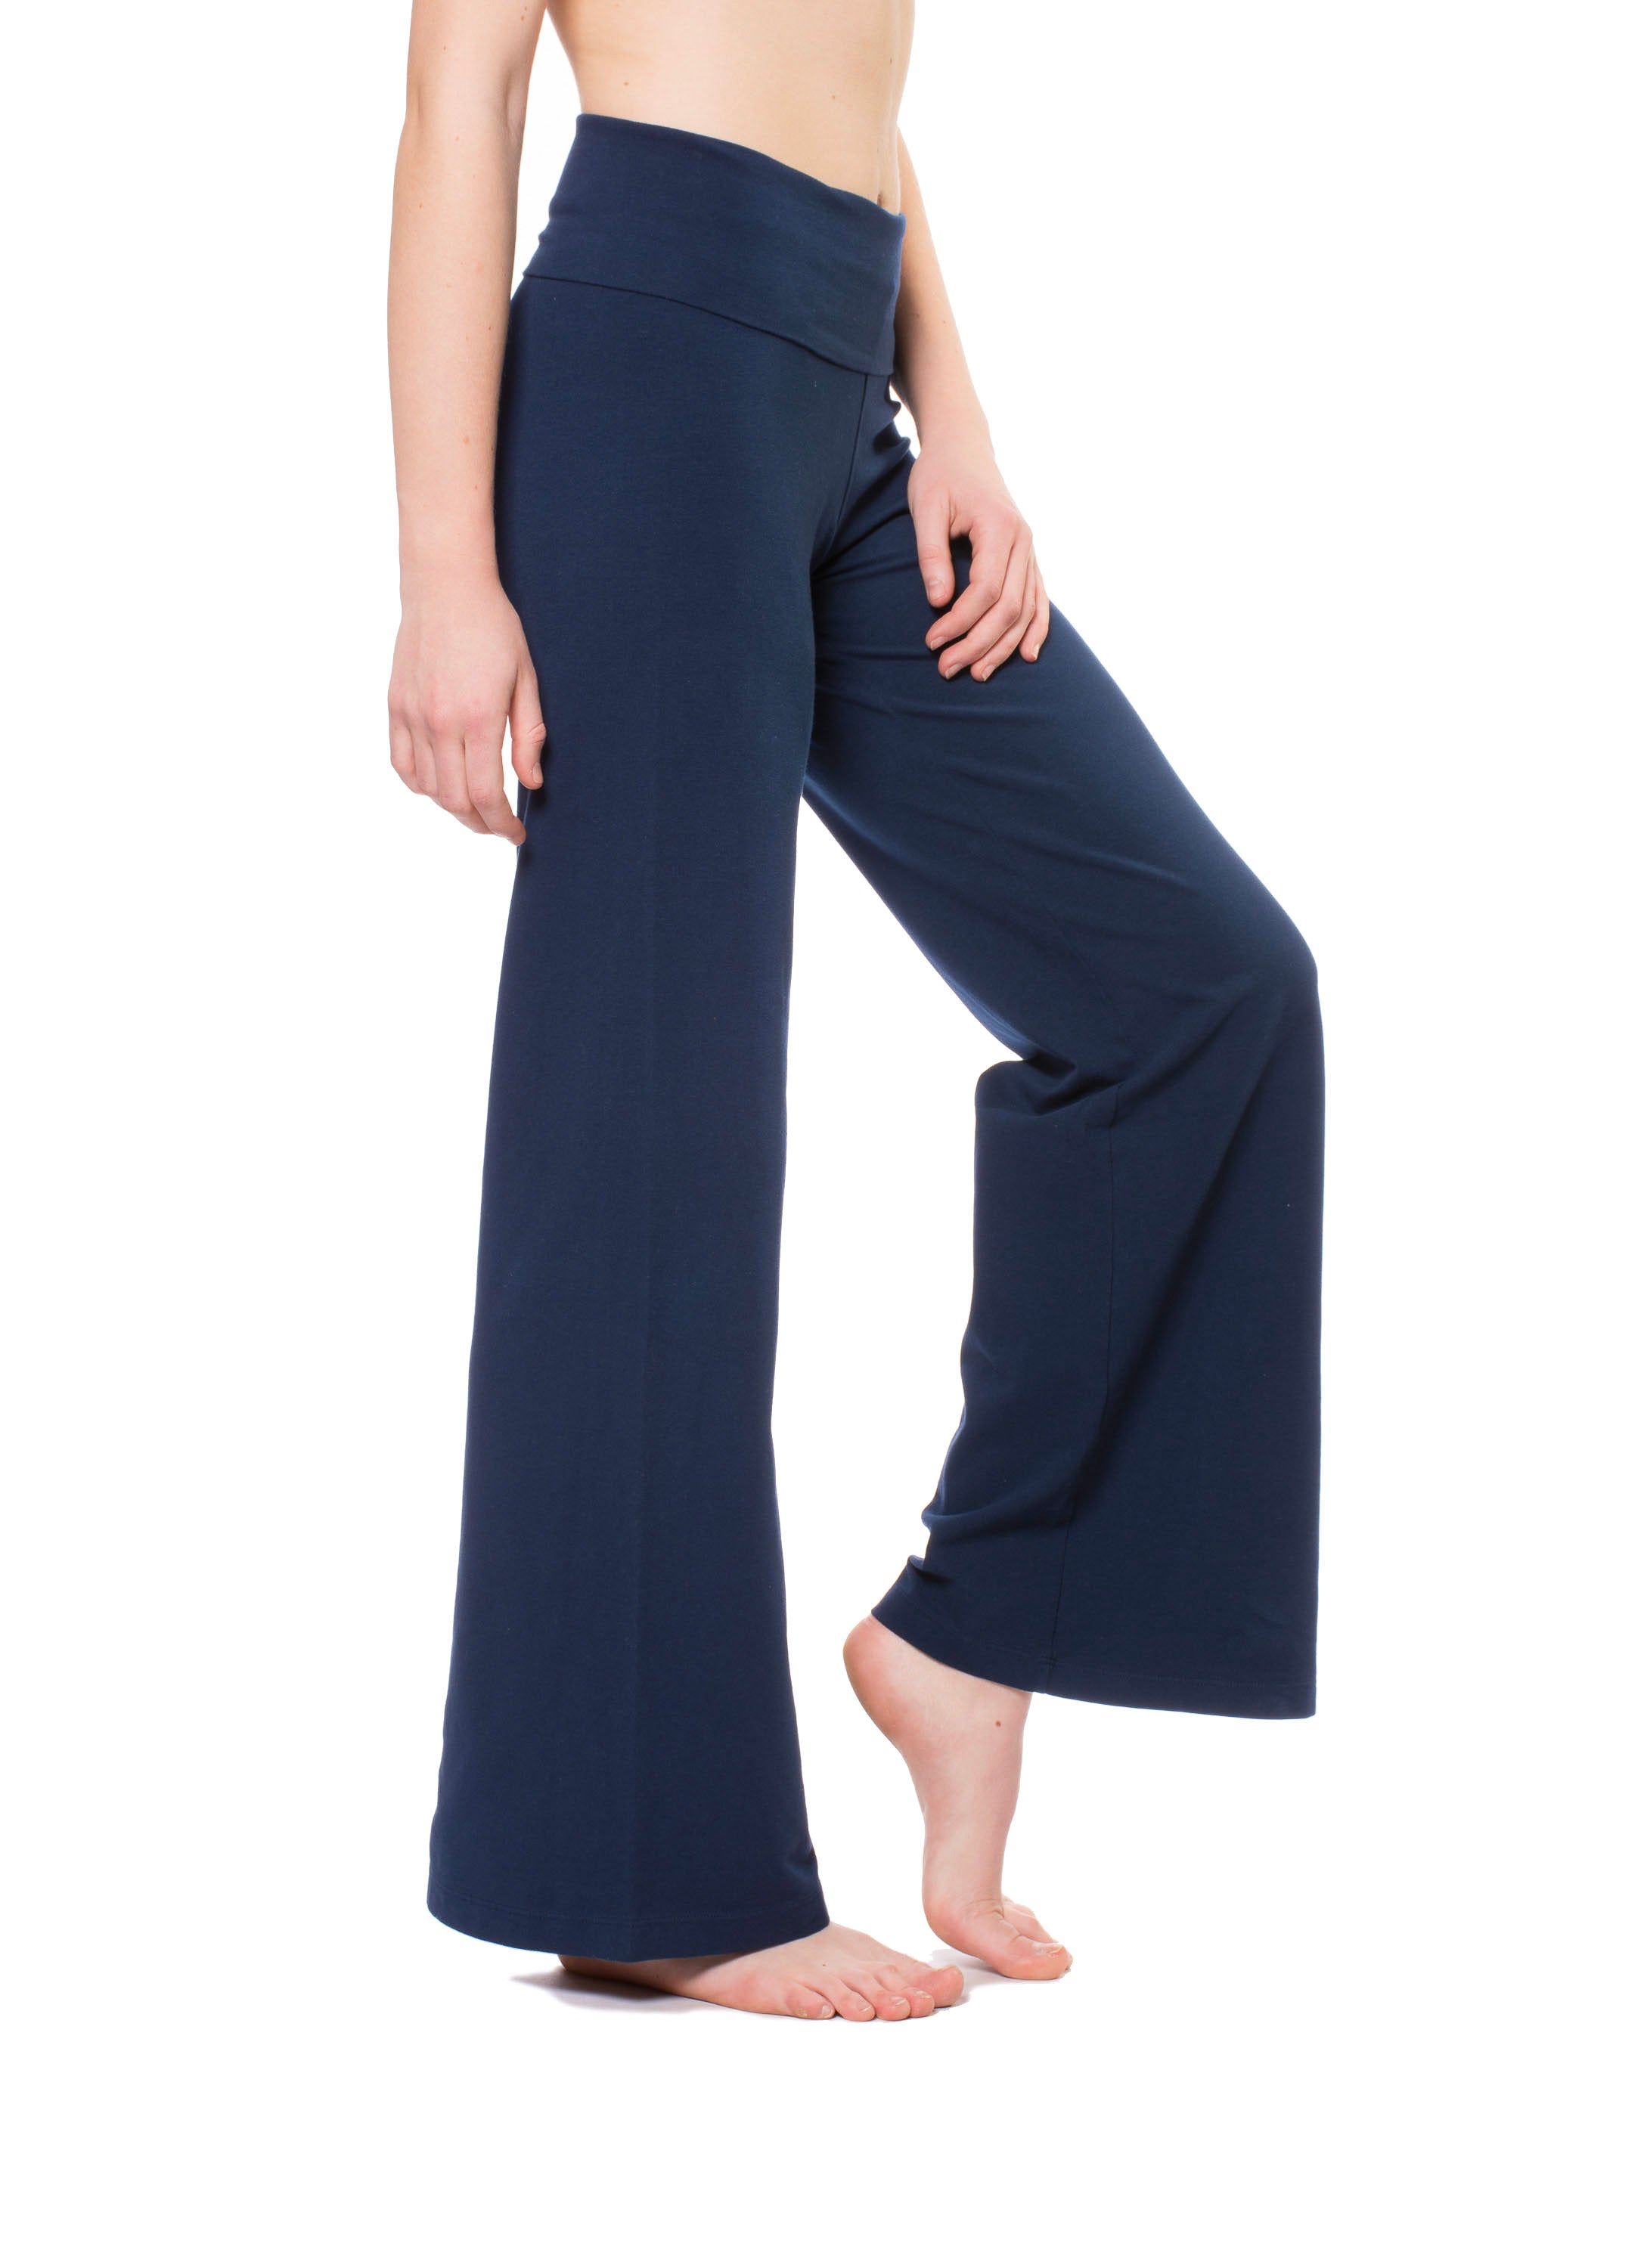 Wide Leg Roll Down Pants (Style W-326, Navy) by Hard Tail Forever